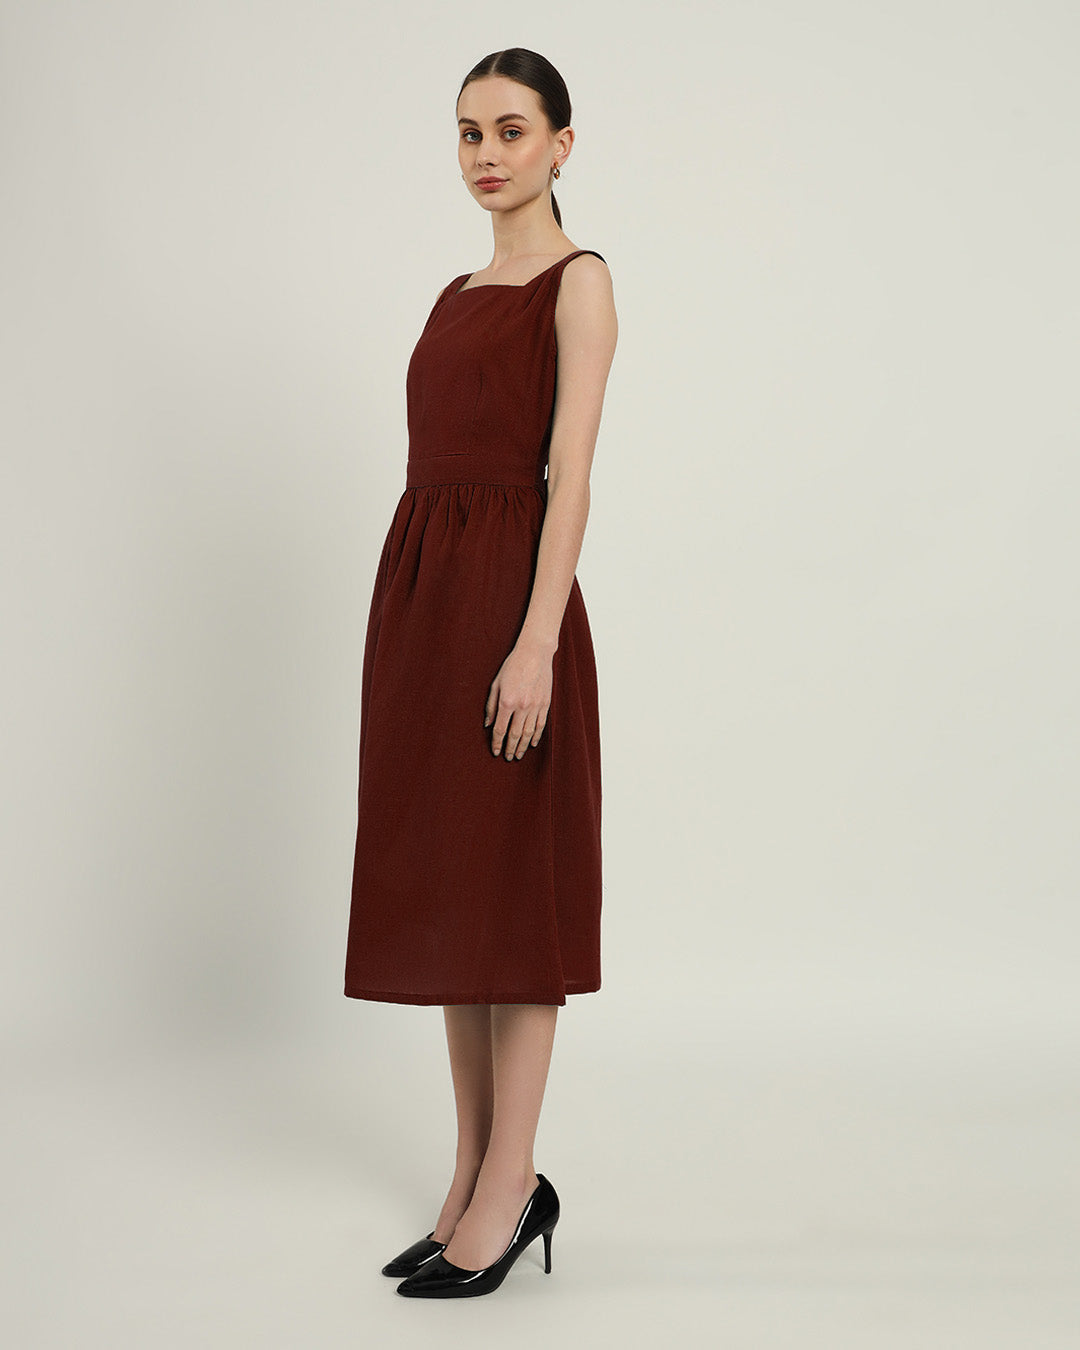 The Mihara Rouge Dress